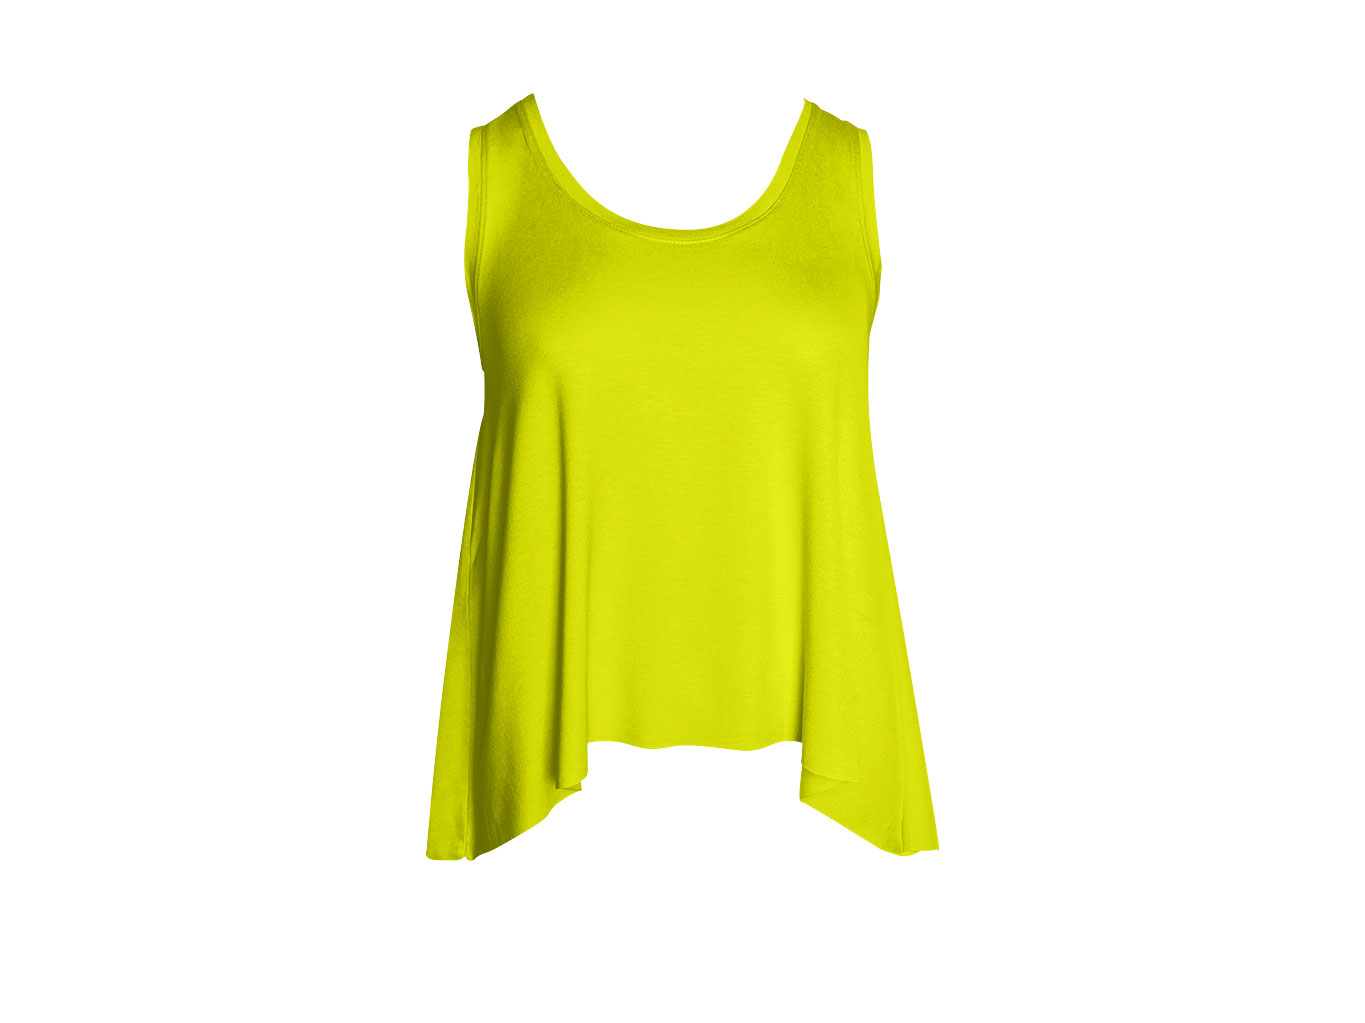 Fluo Yellow Tank Top - Ripped Cotton